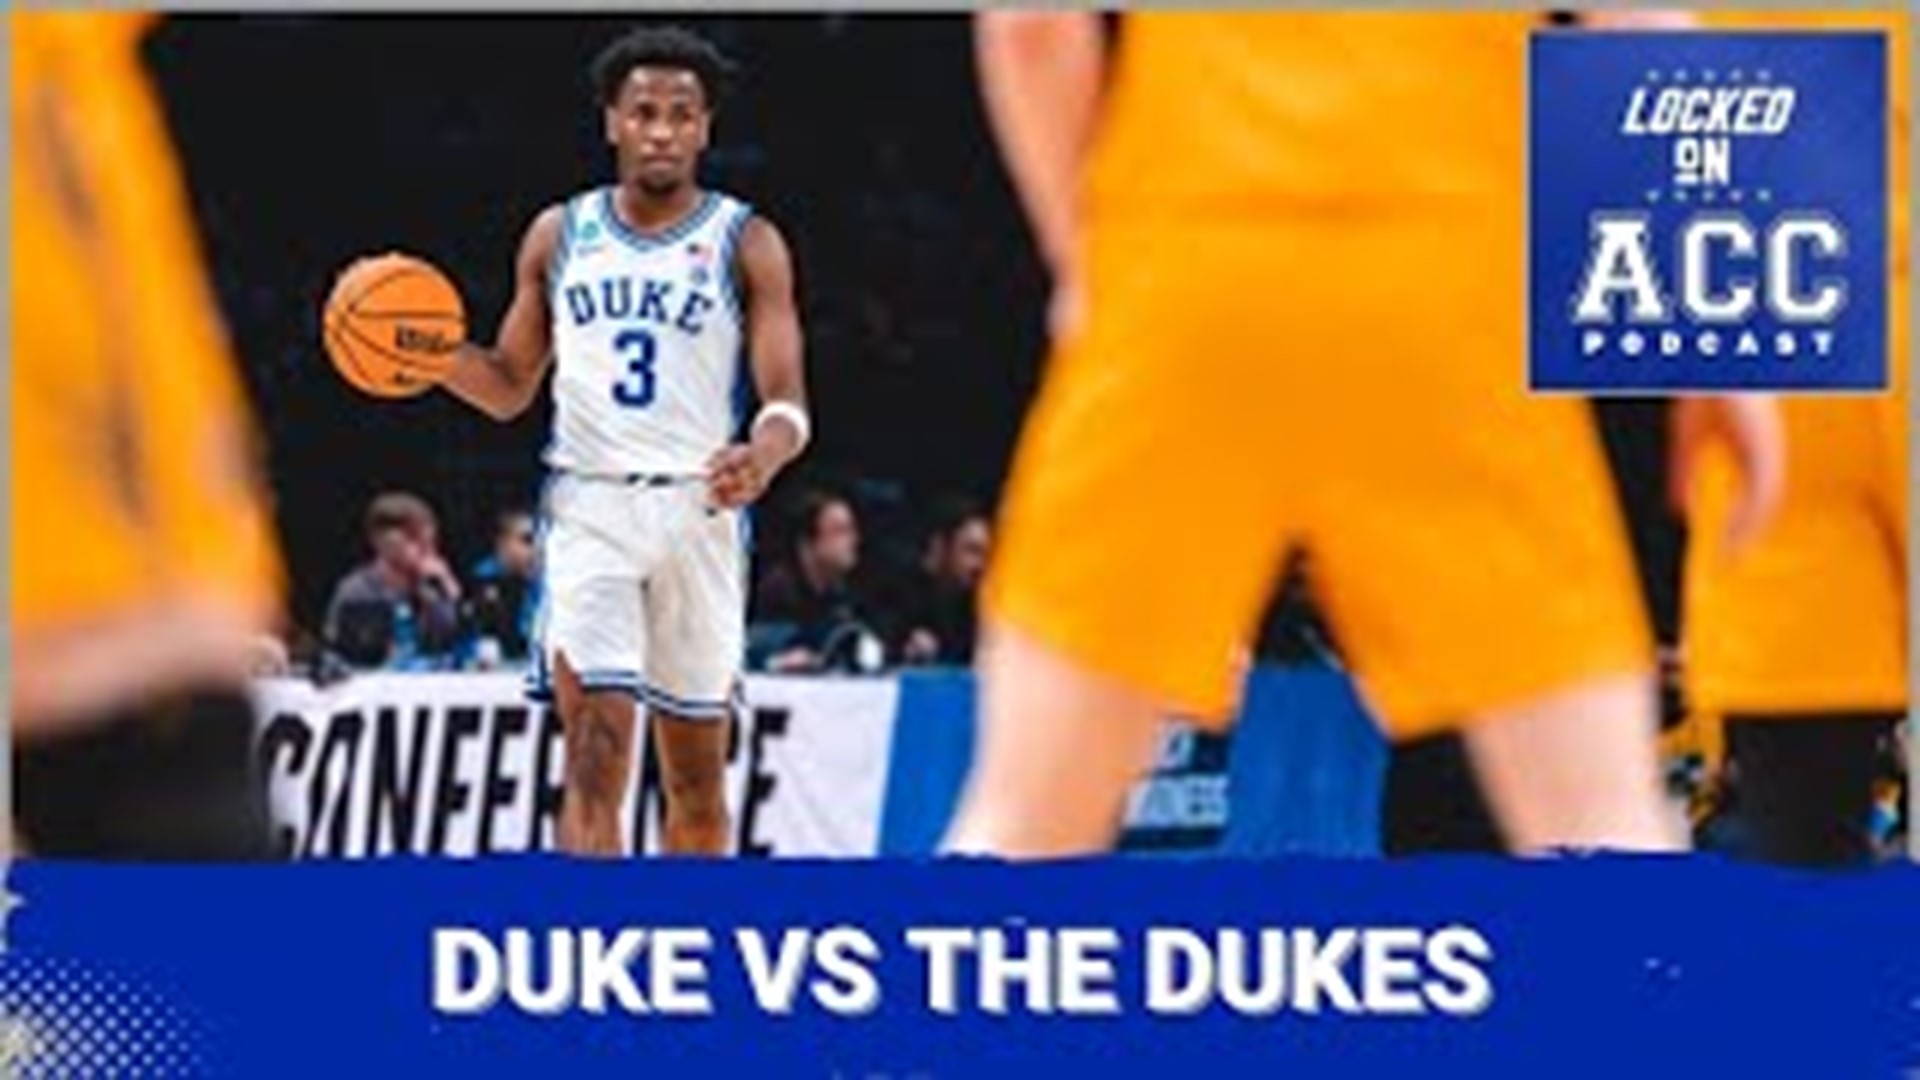 Previewing the JMU Dukes vs the Duke Blue Devils in a Crossover Edition with Locked On ACC's Candace Cooper.
How Good Is Duke?